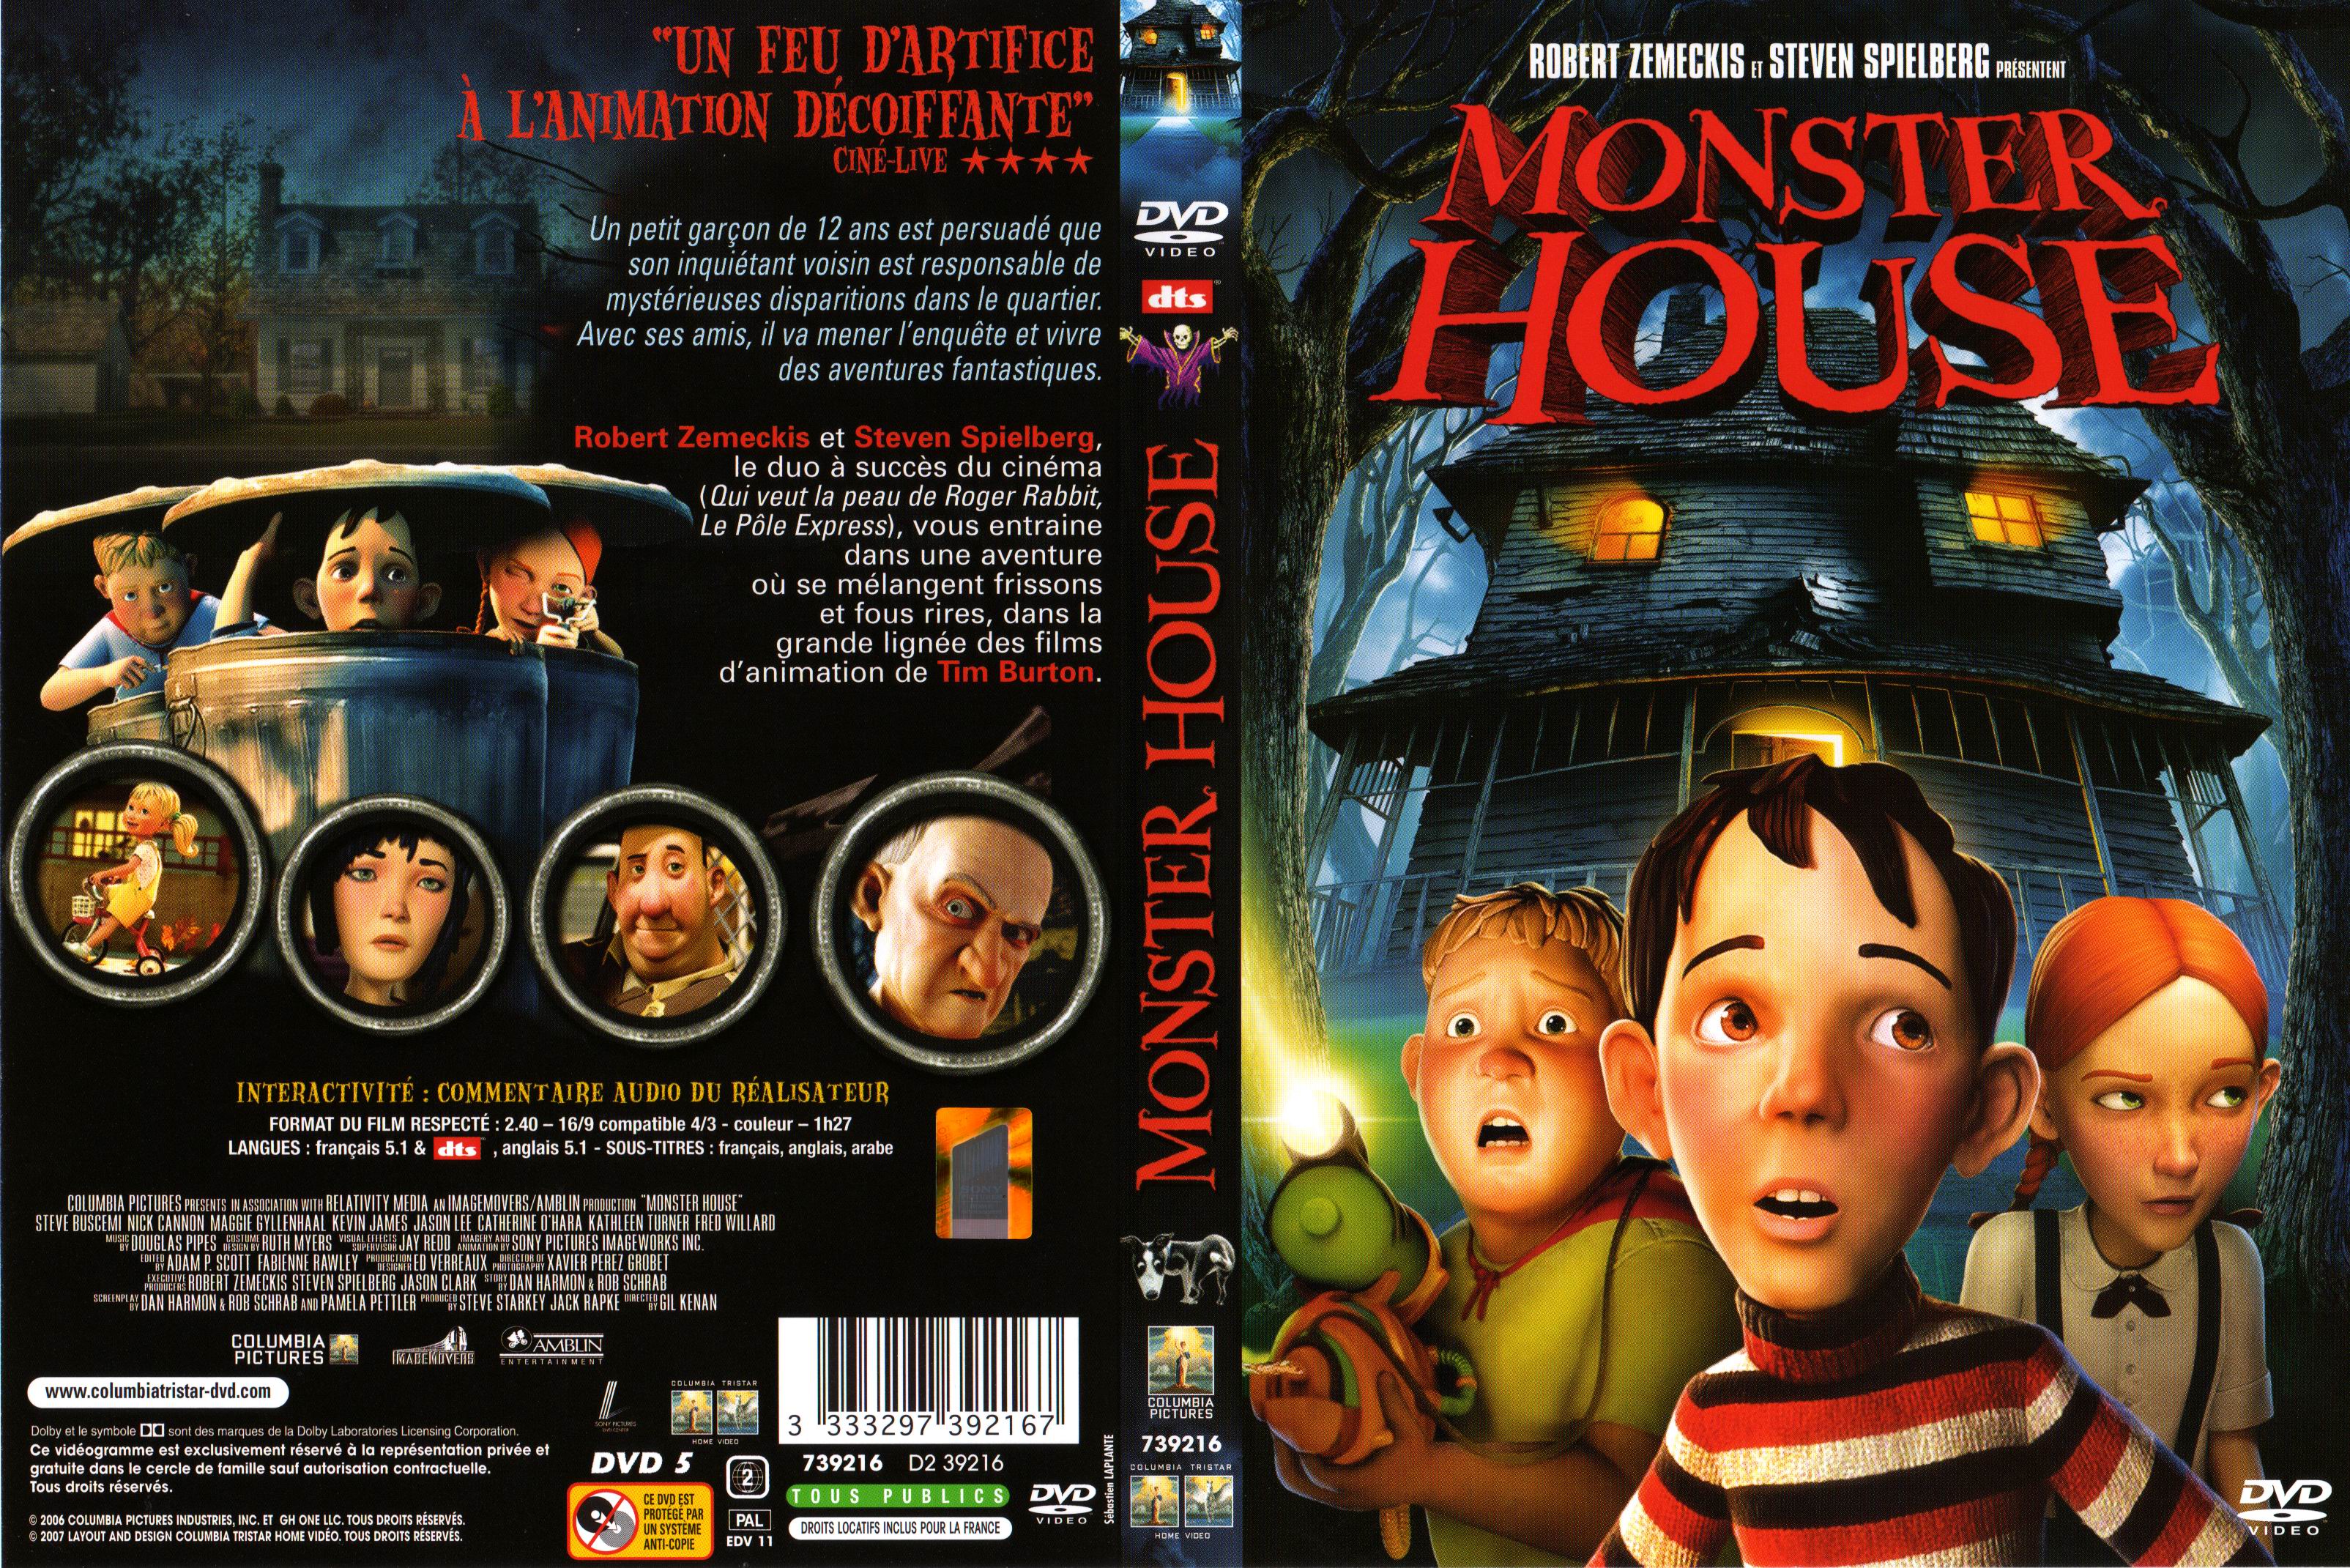 Jaquette DVD Monster house